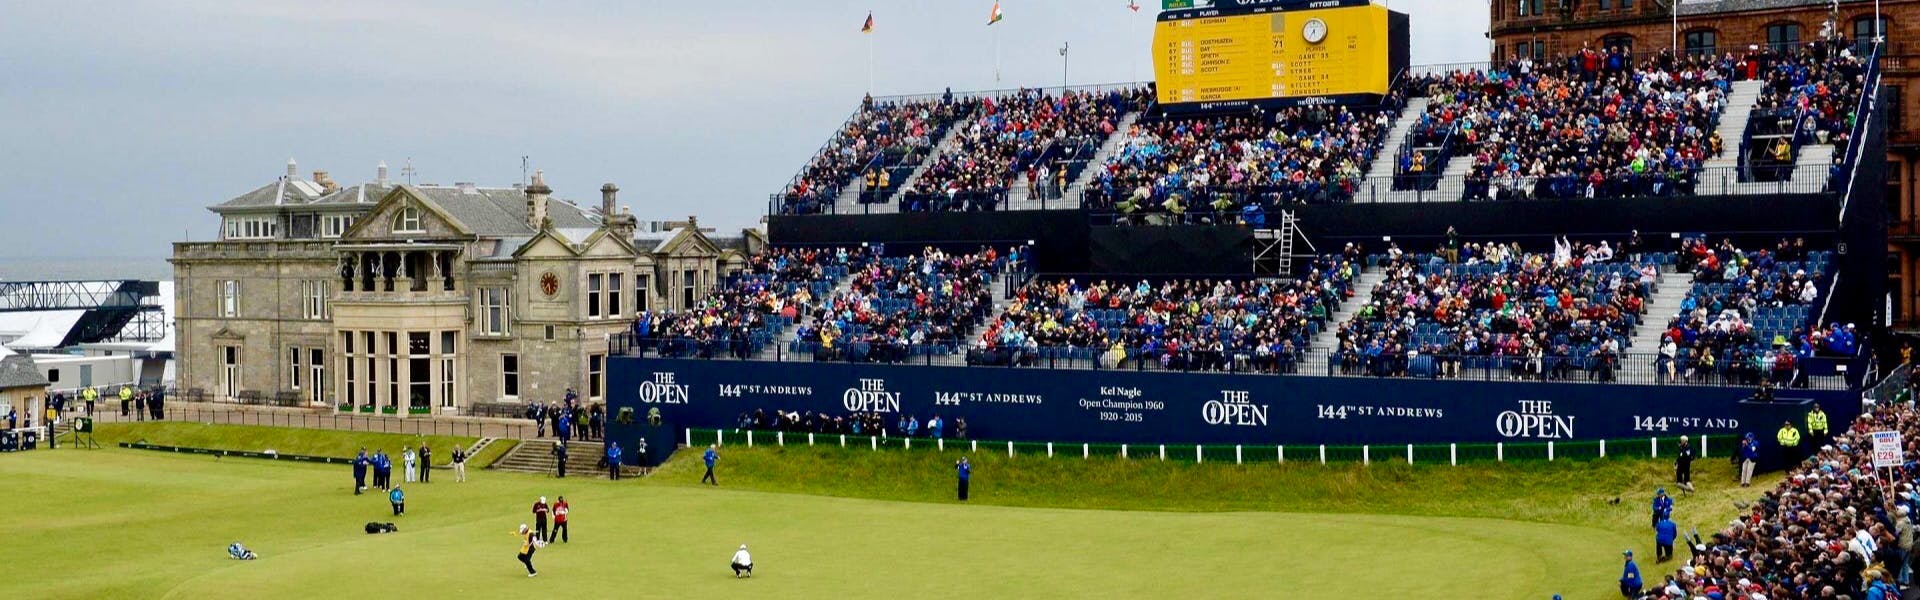 The 144th Open Championship at St. Andrews. The picture features a crowd in risers, players on a field, and a clubhouse. 